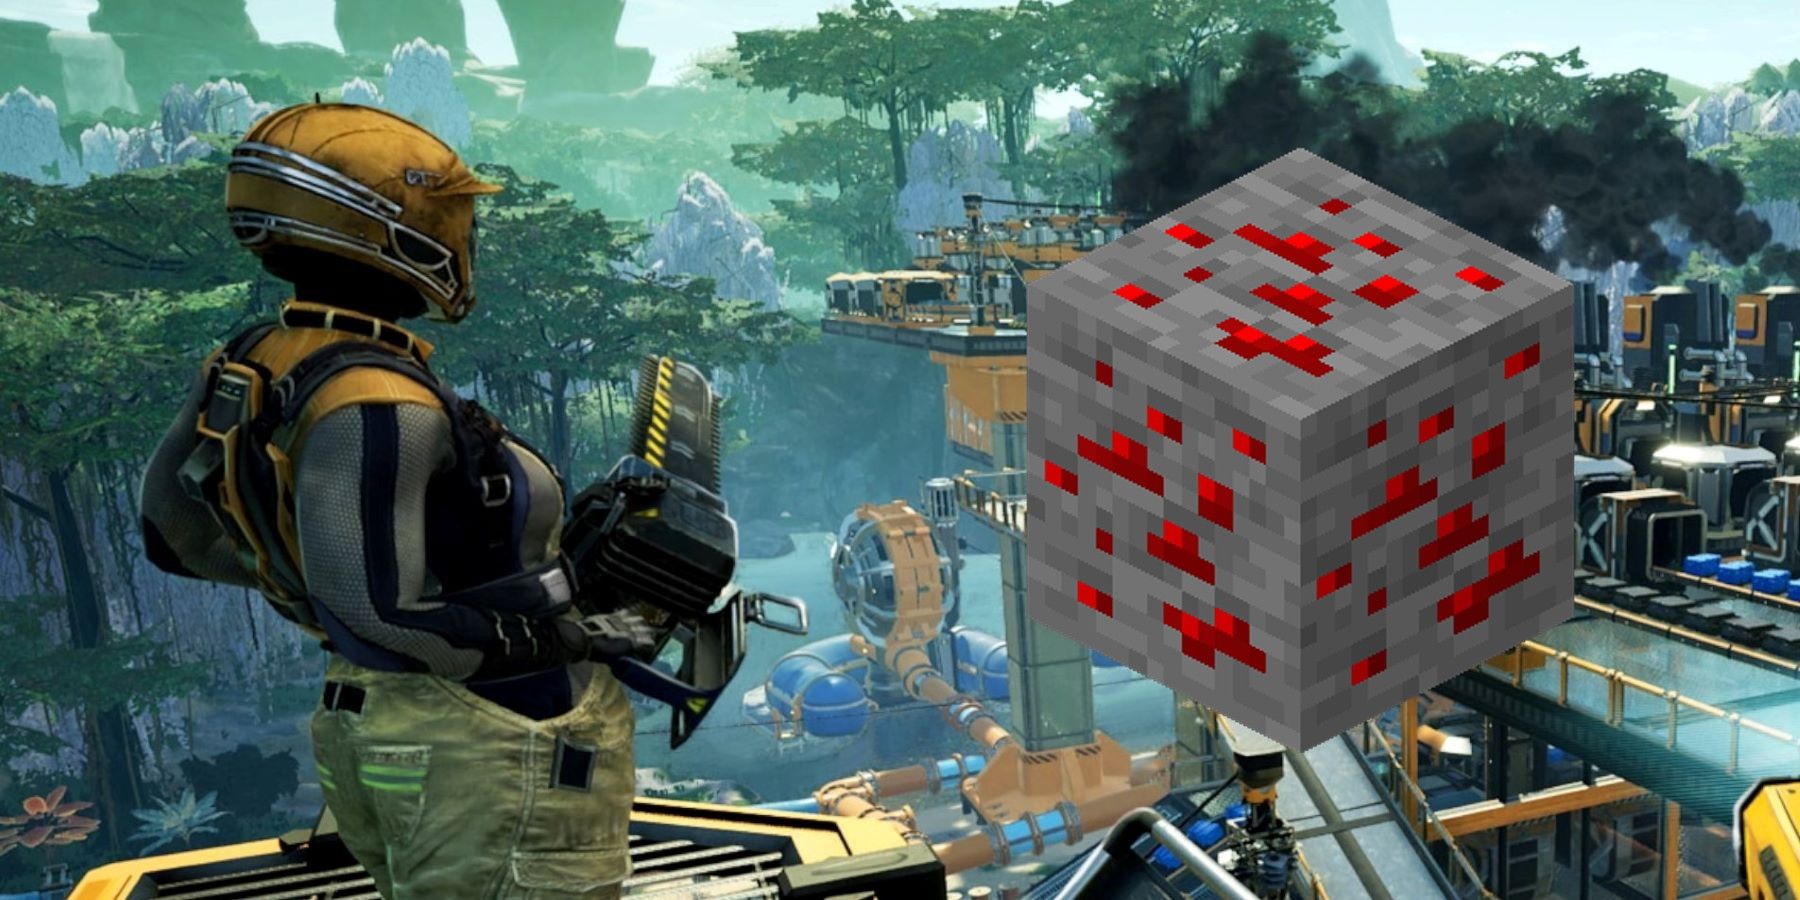 A Satisfactory player looking at a Redstone Ore block from Minecraft superimposed over a factory